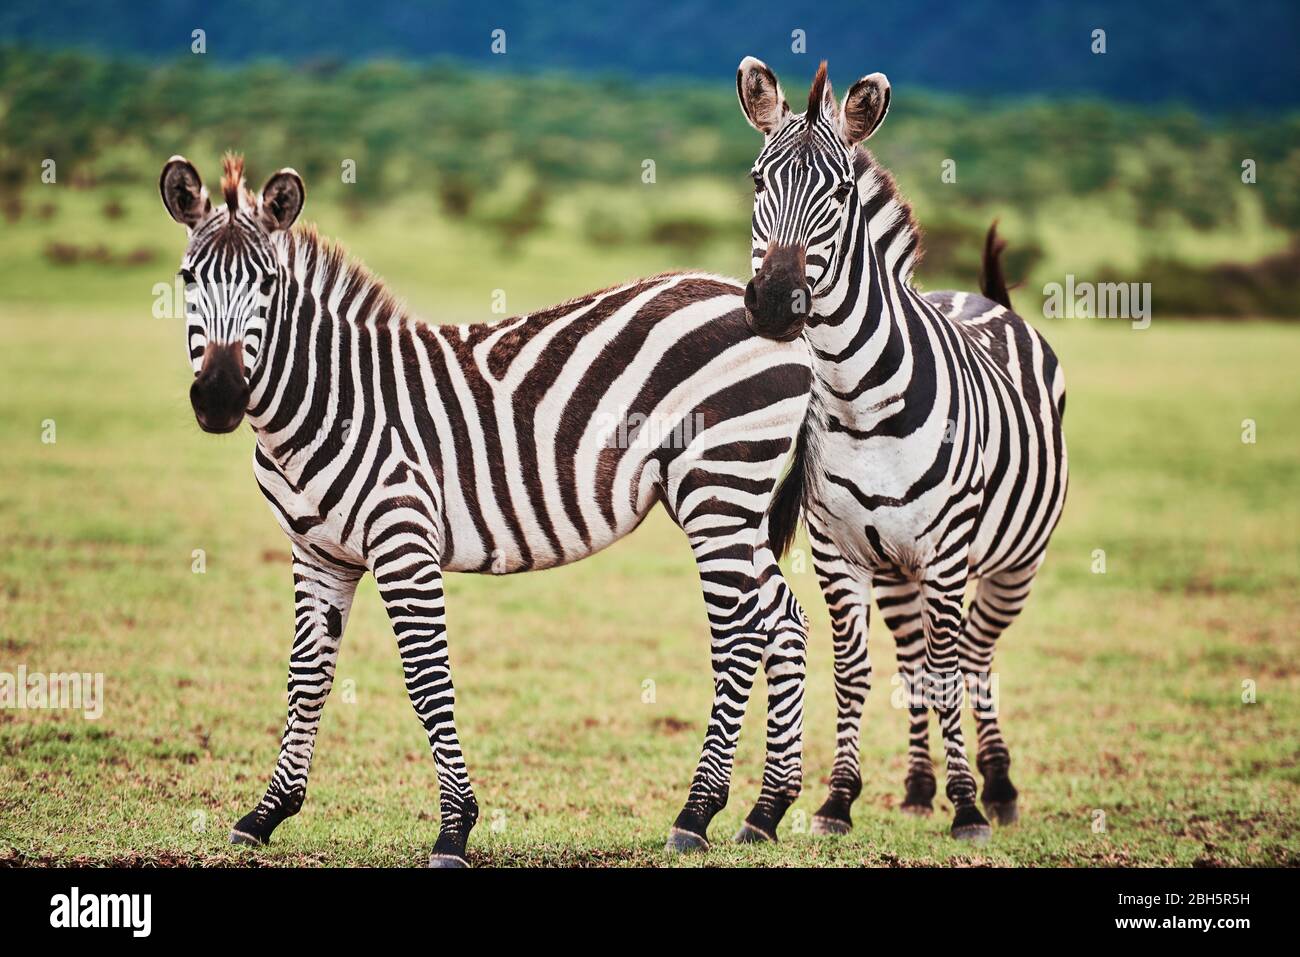 Two beautiful zebras in Africa Stock Photo